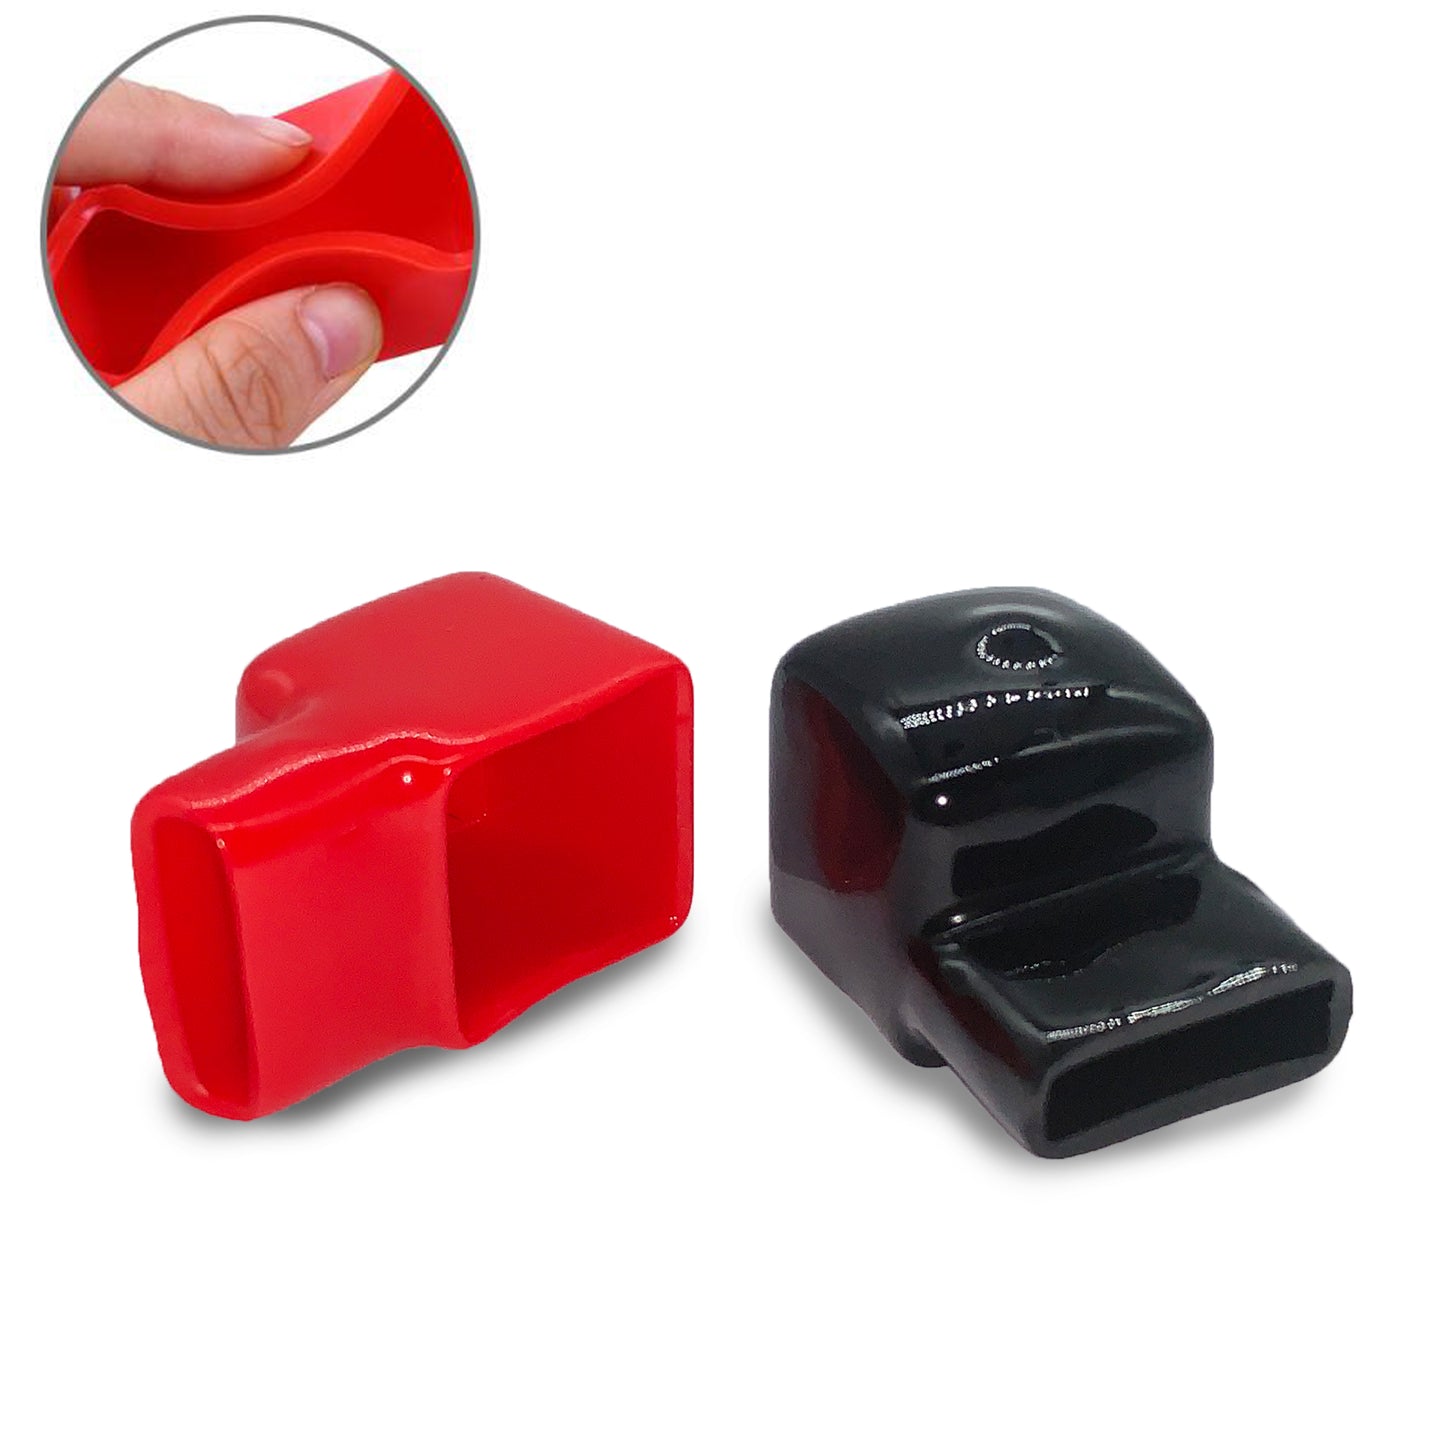 8Pcs Square Red&Black Insulation Terminal Covers Perfect for Lifepo4 Cells